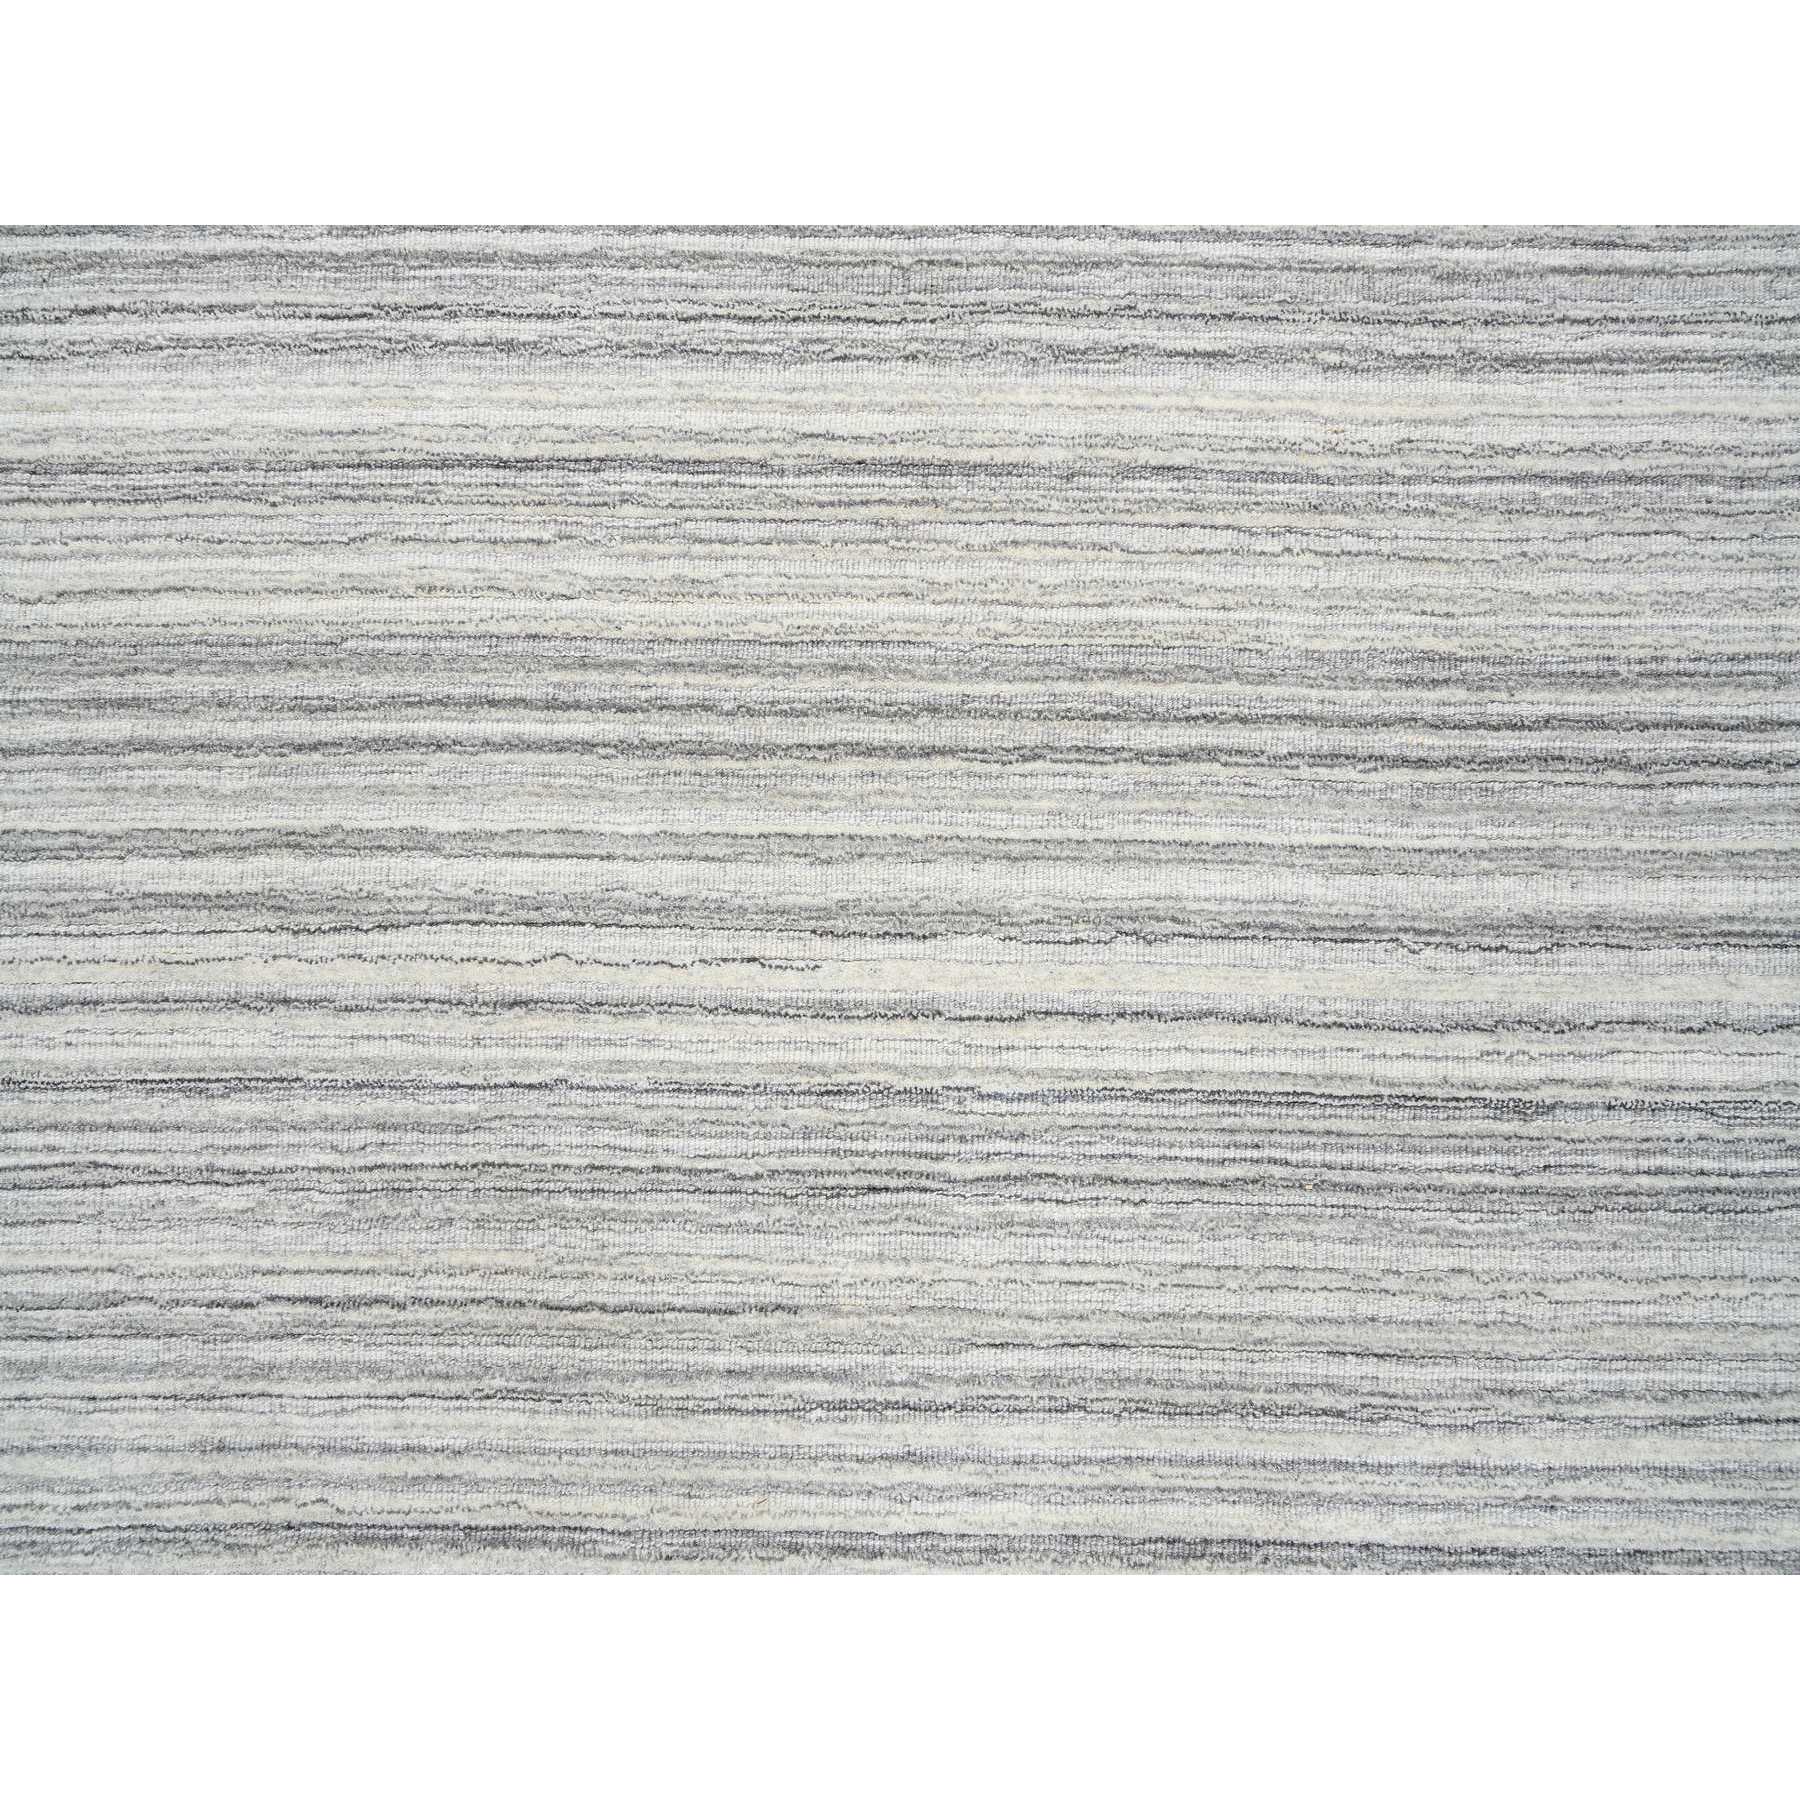 8'x8' Platinum Gray and Cream, Modern Design Thick and Plush, Plain Hand Loomed Undyed Natural Wool, Round Oriental Rug 